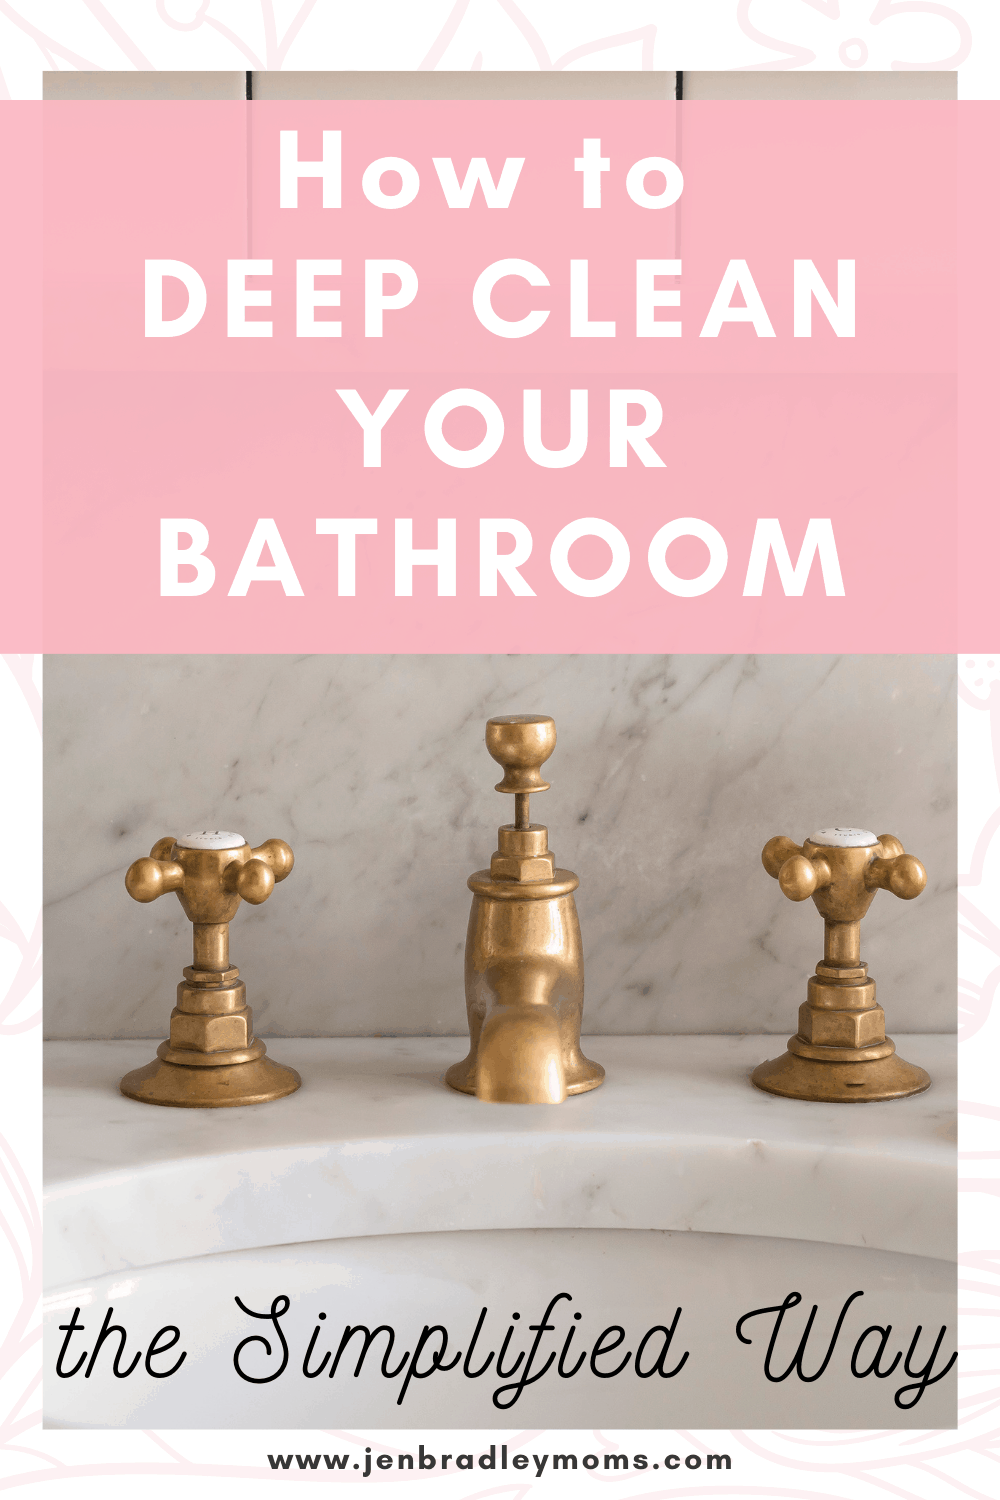 How to Deep Clean Your Bathroom - The Simplified Way